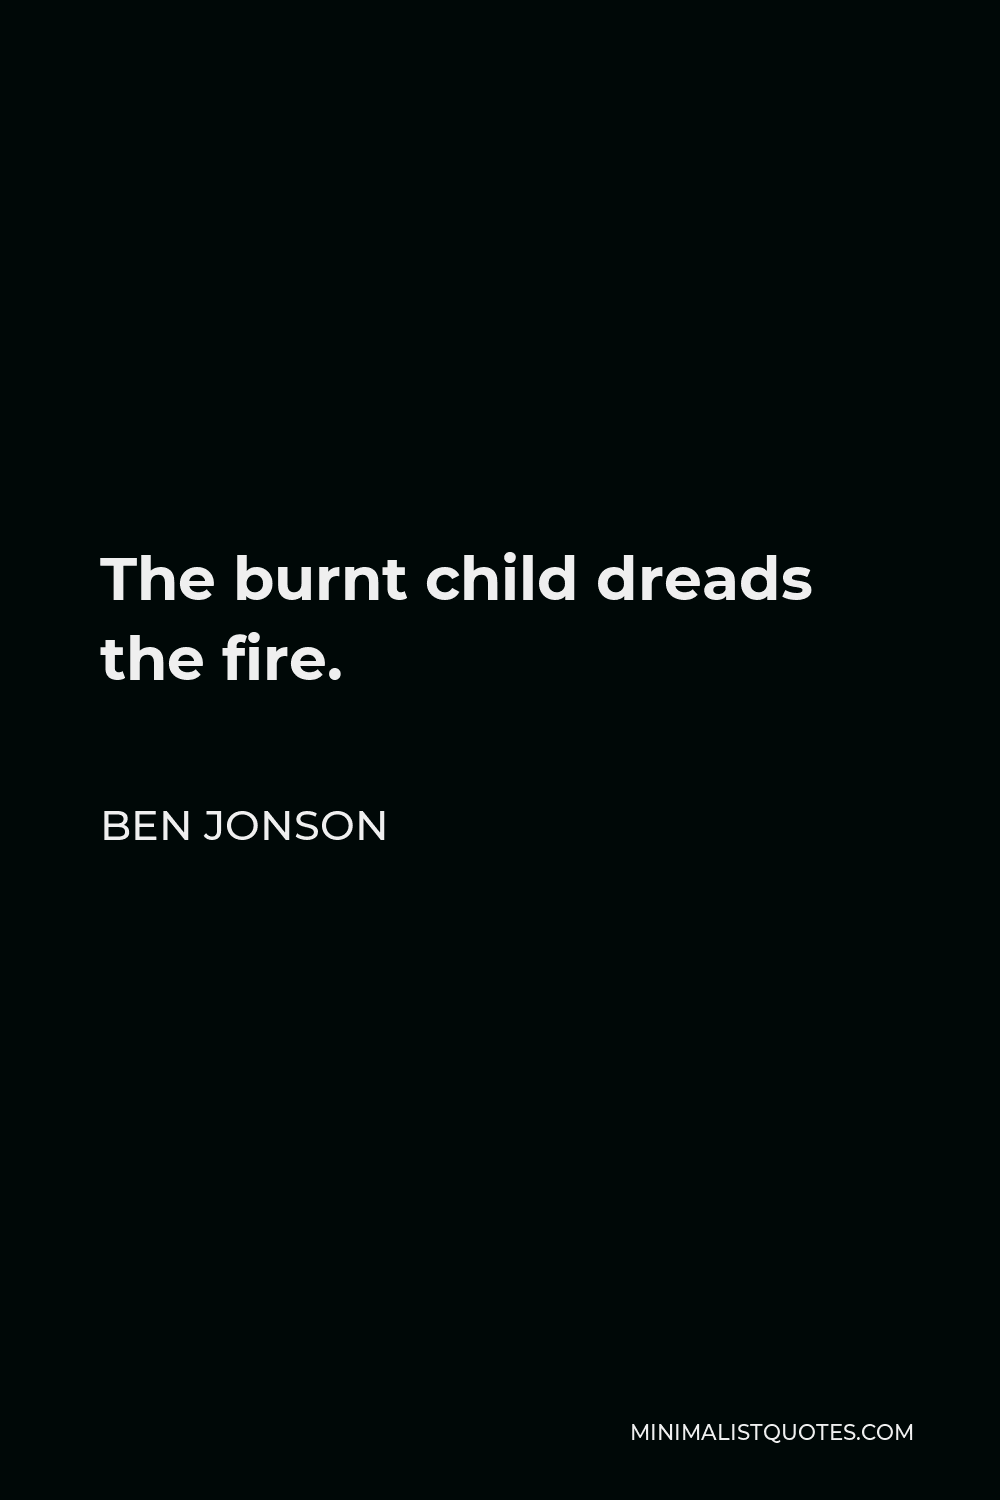 Ben Jonson Quote - The burnt child dreads the fire.